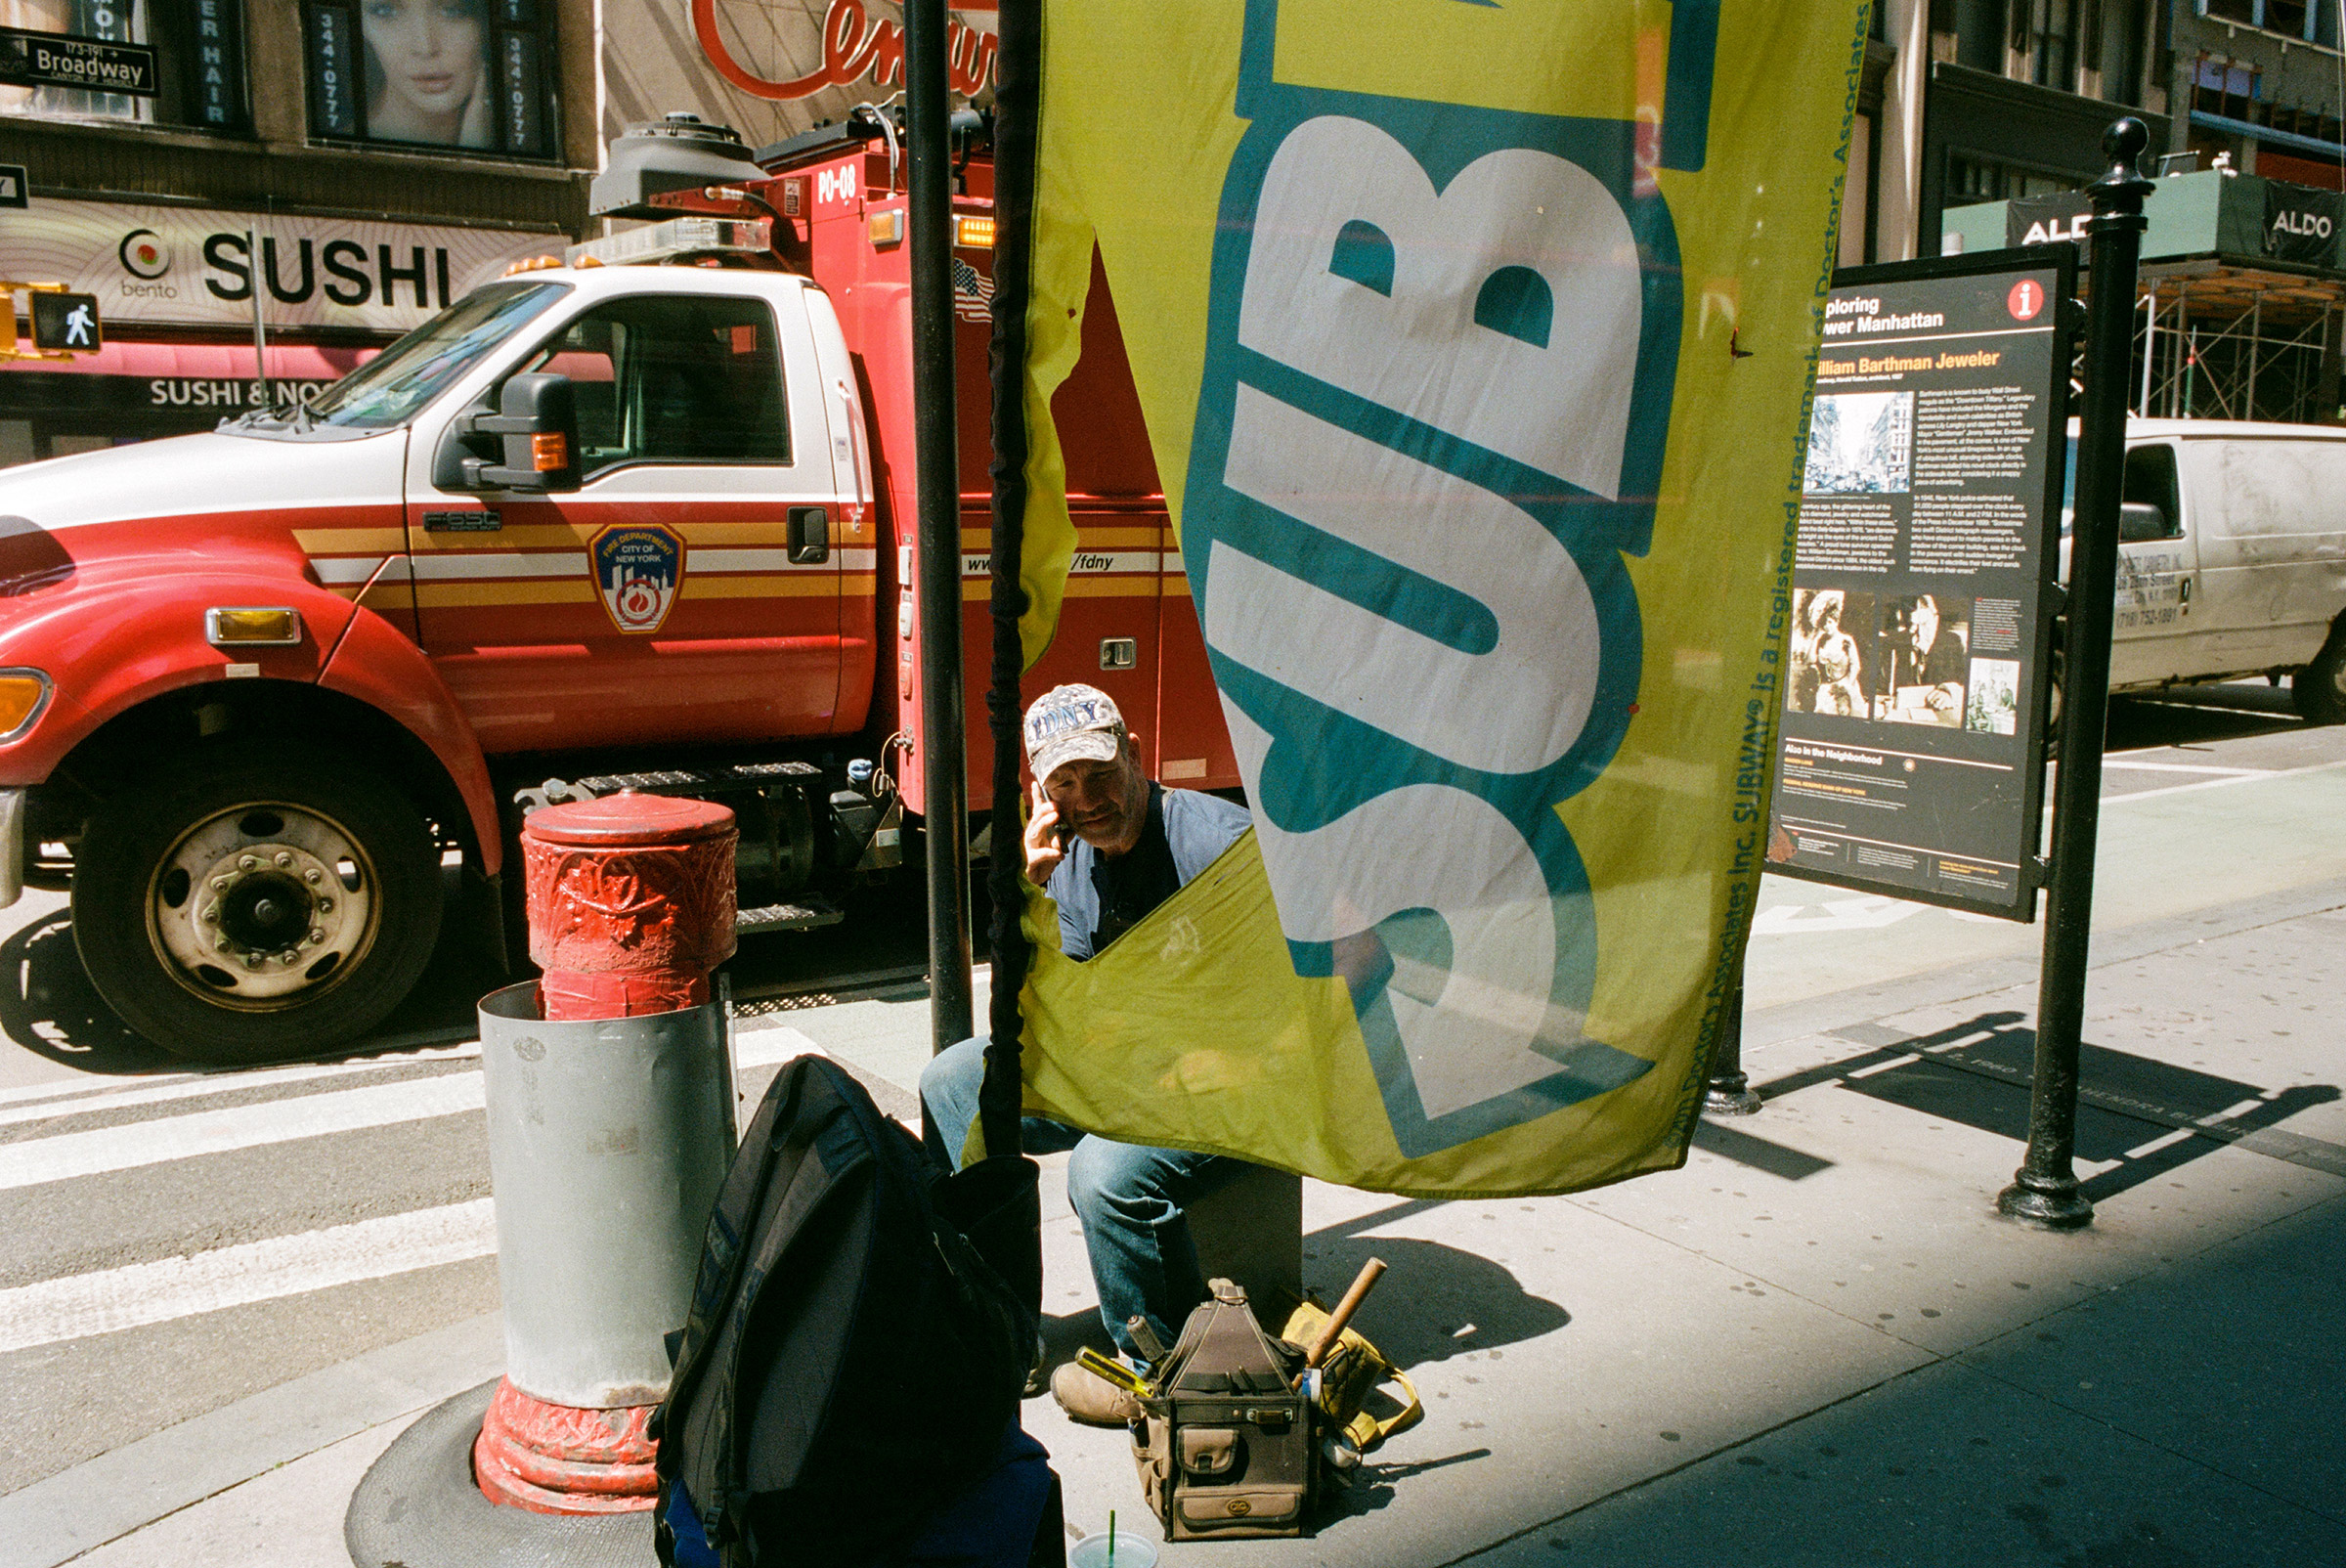 An FDNY repairman takes a break on lower Broadway, Aug. 25, 2021. (Daniel Arnold for TIME)